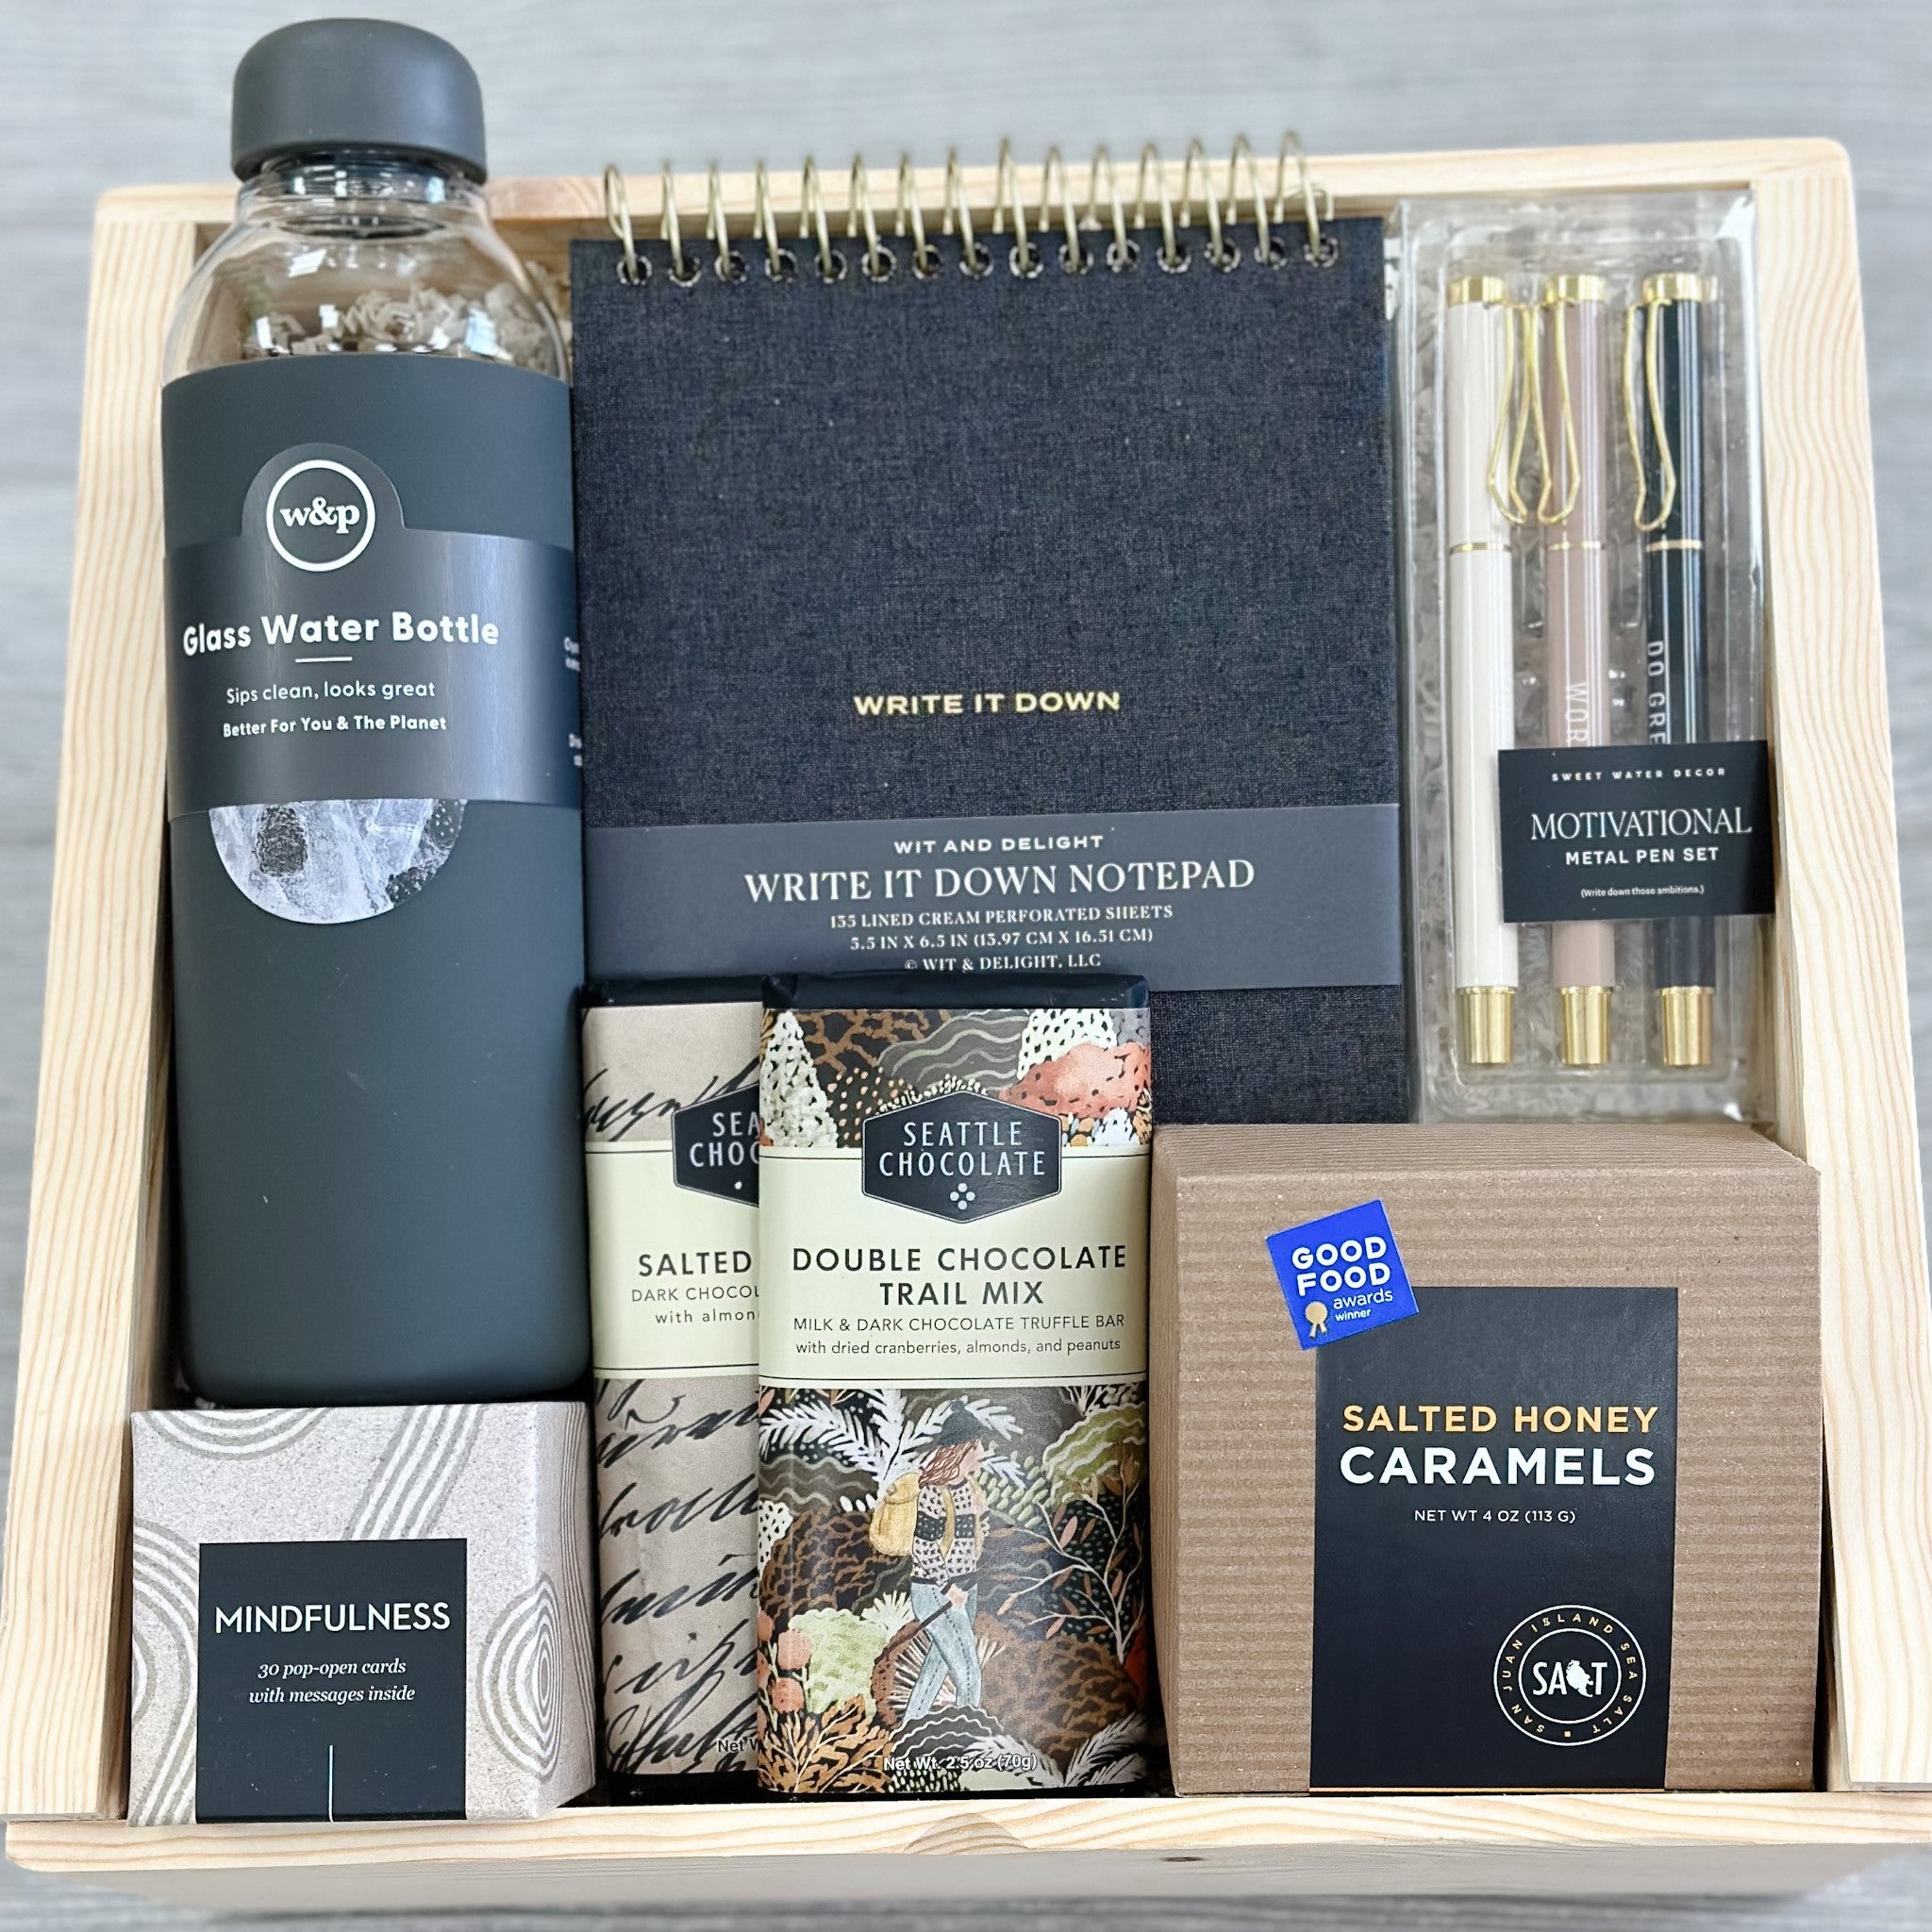 glass water bottle, luxury notepad, motivational pens, caramels, chocolate bars, inspirational quotes all packaged in our "you got this" gift basket